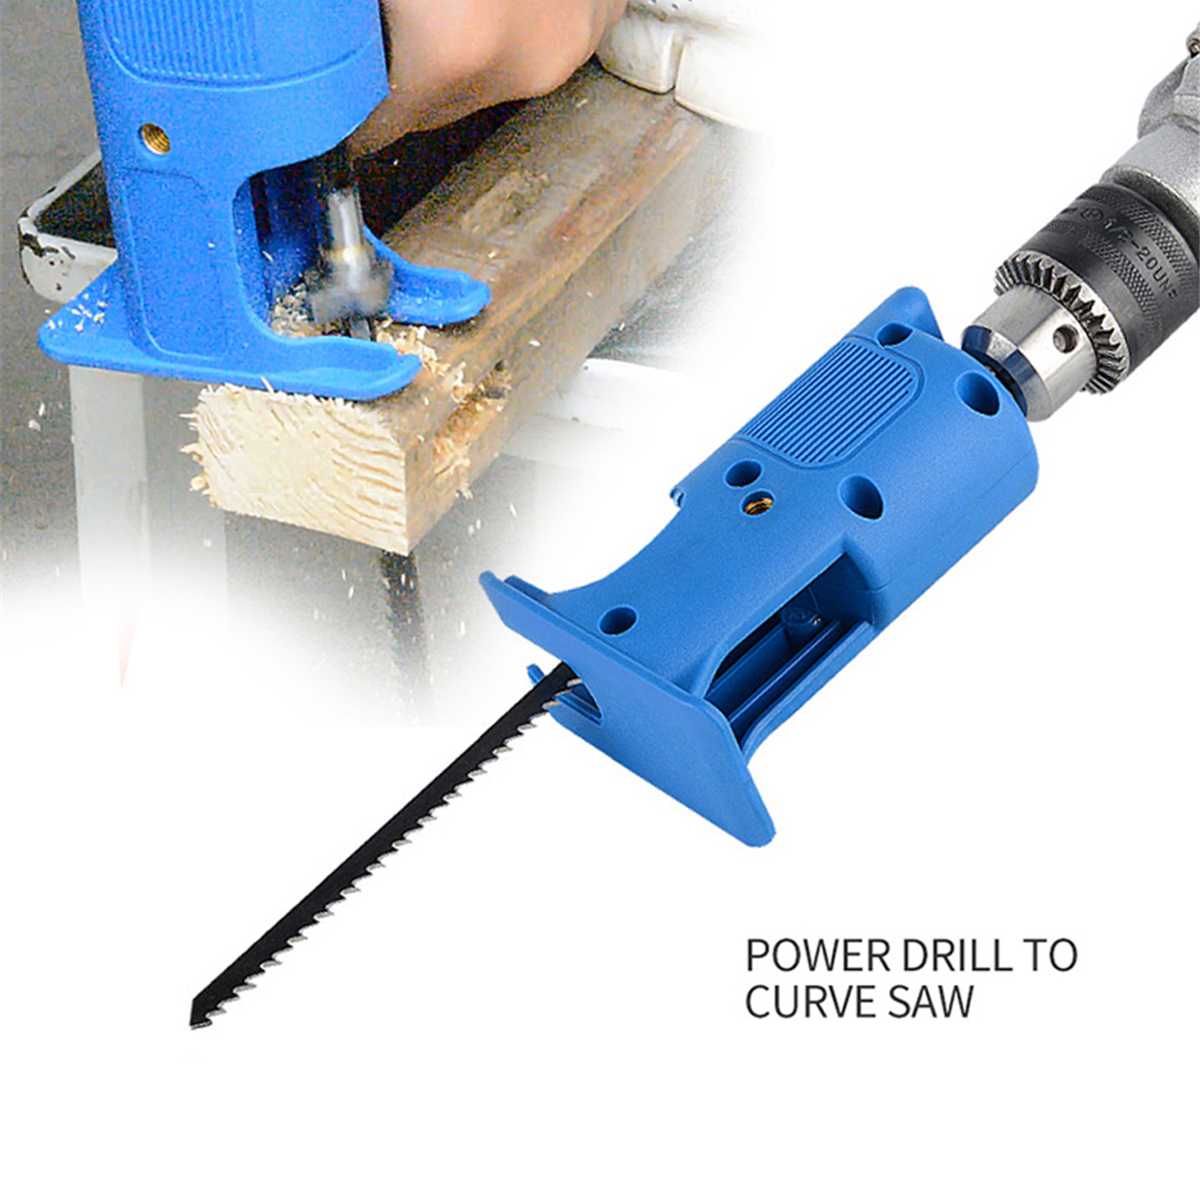 Drillpro-Reciprocating-Saw-Attachment-Adapter-Change-Electric-Drill-Into-Reciprocating-Saw-for-Wood--1711693-2